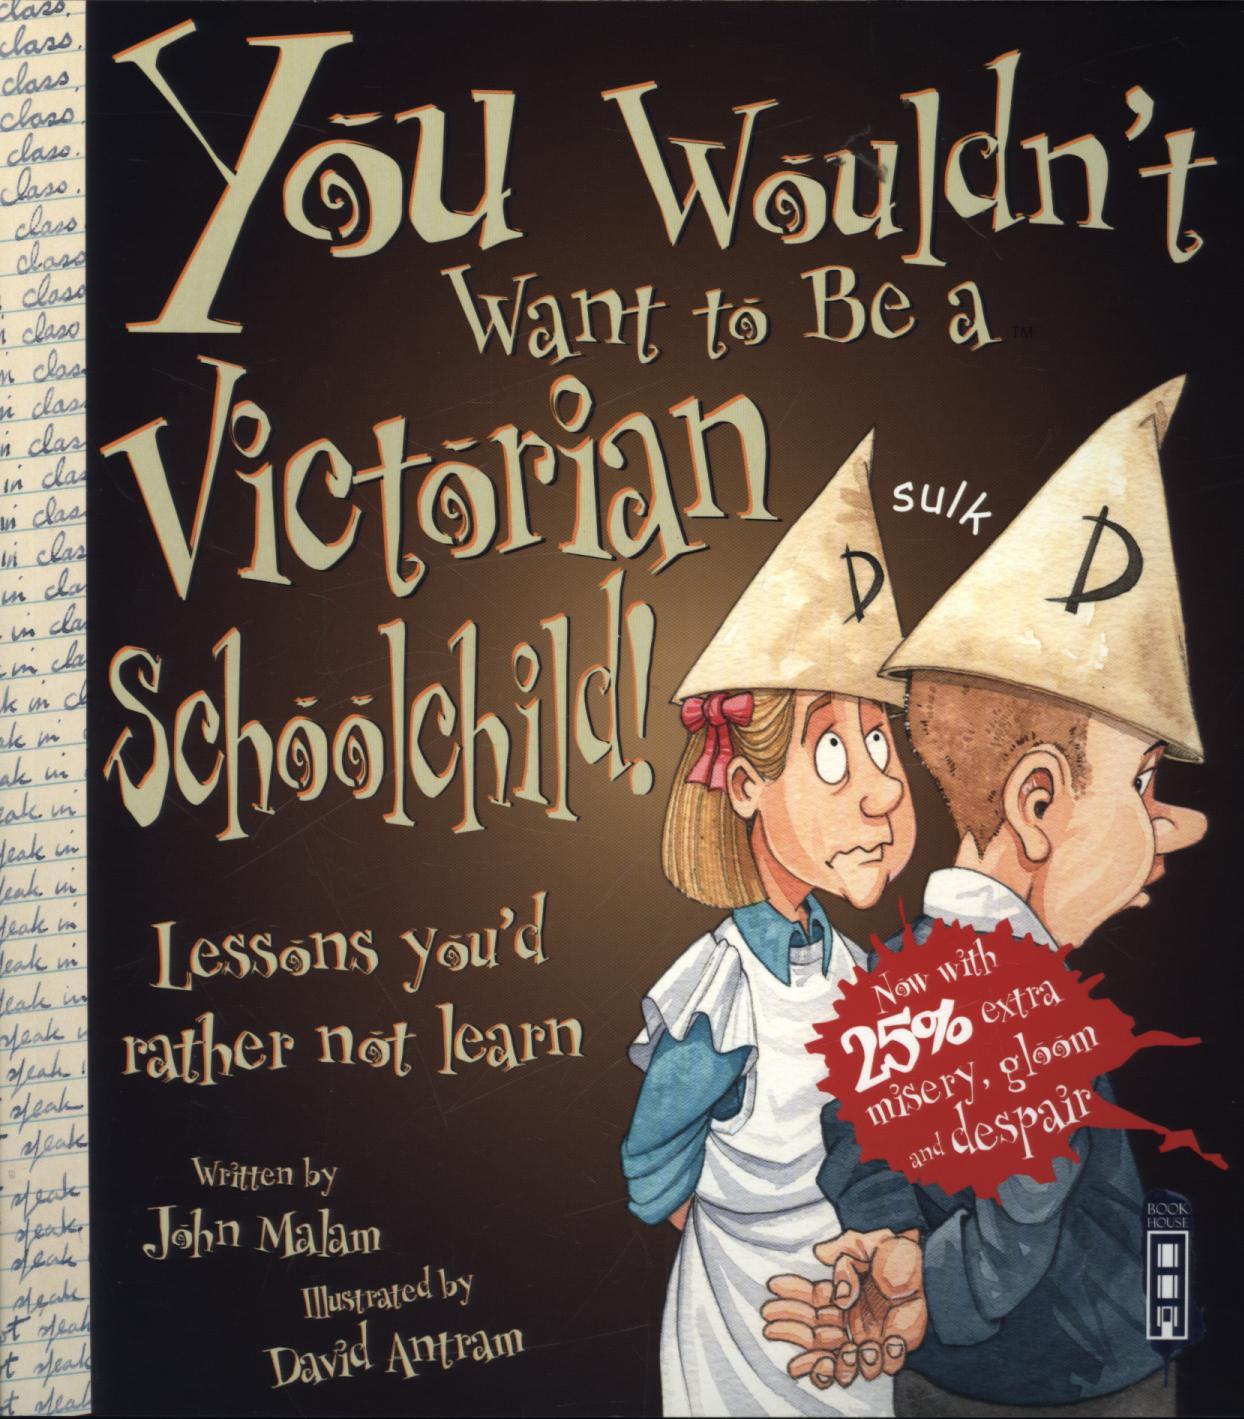 You Wouldn't Want to be a Victorian Schoolchild!